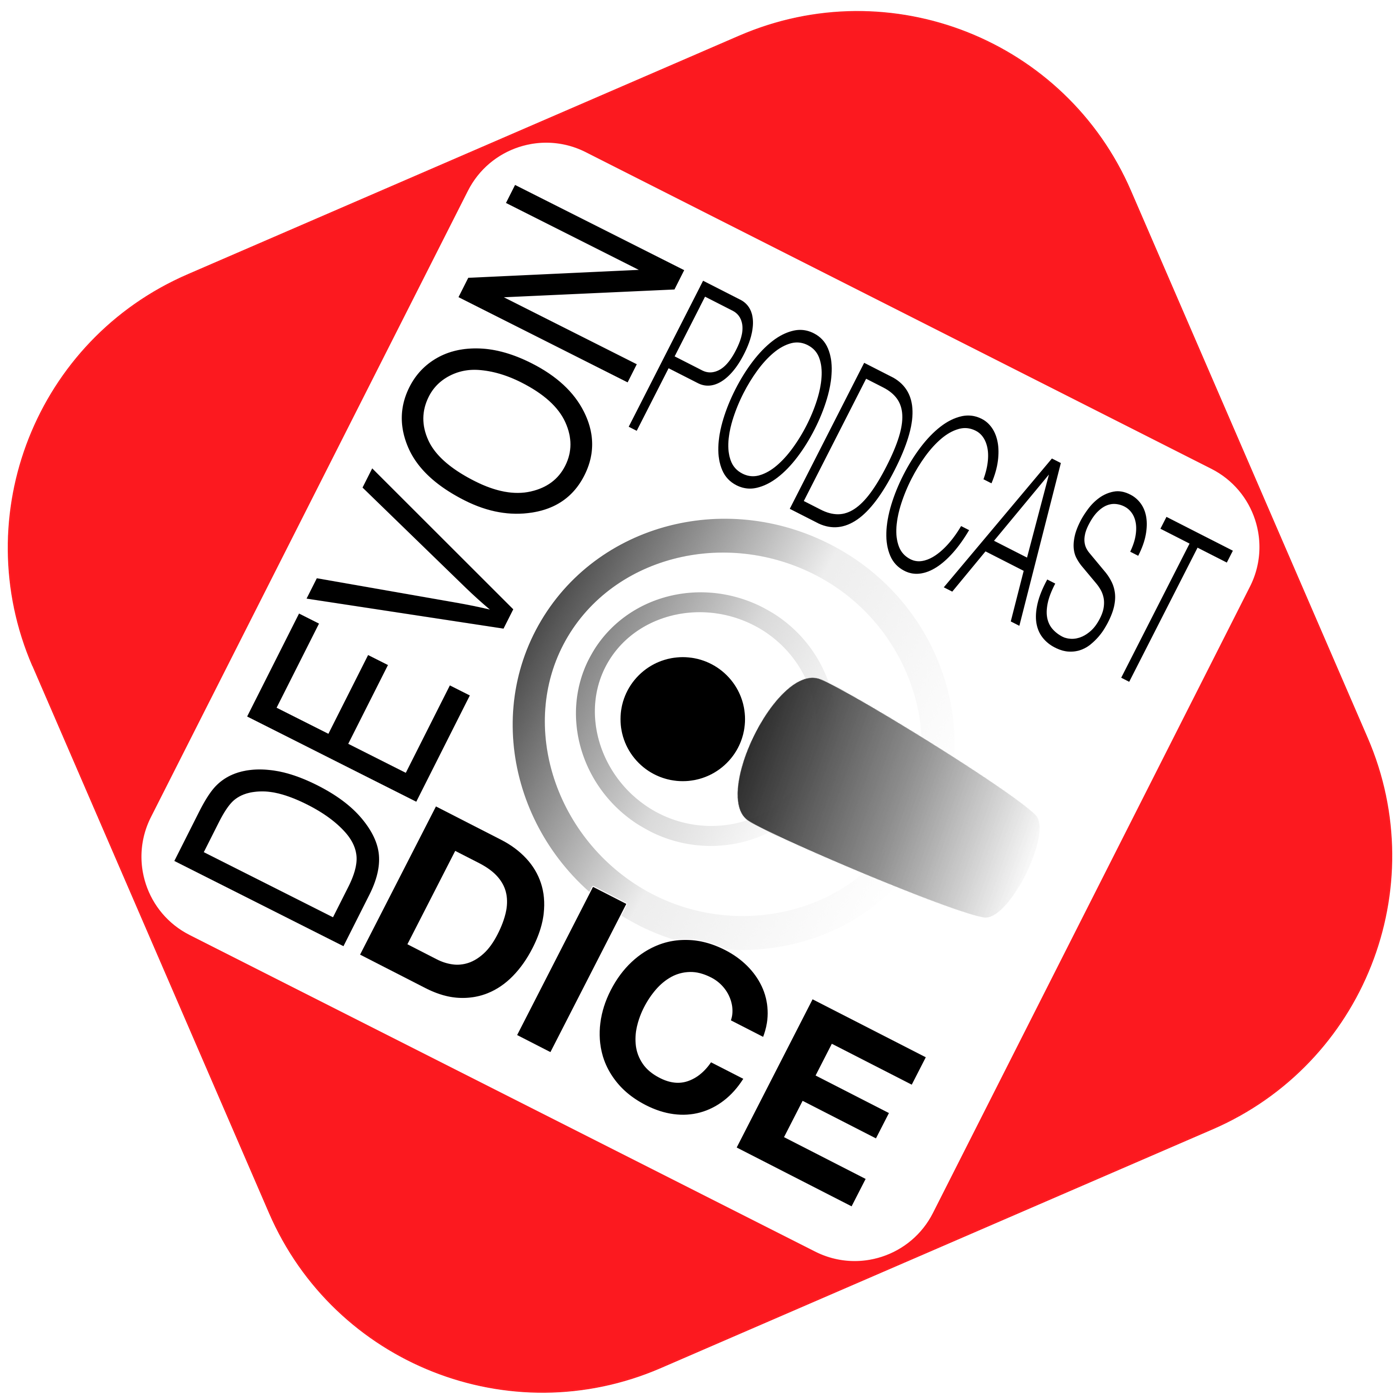 9. Devon Dice Podcast – The Gallerist Review  and more